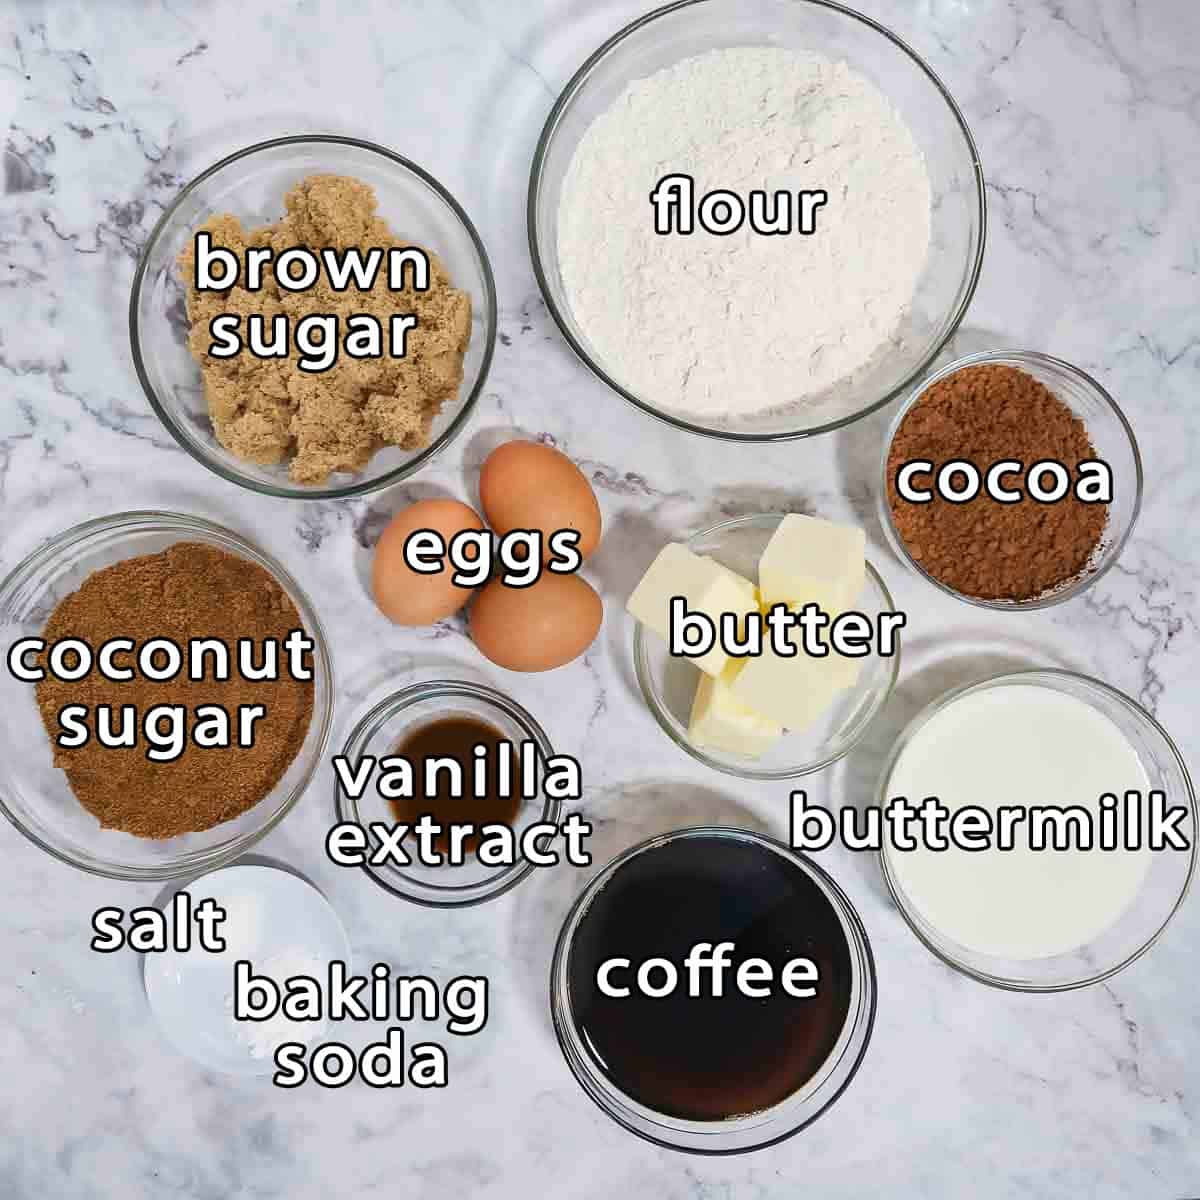 Overhead shot of cake ingredients - flour, brown sugar, coconut sugar, cocoa, eggs, vanilla extract, butter, buttermilk, coffee, salt, and baking soda.